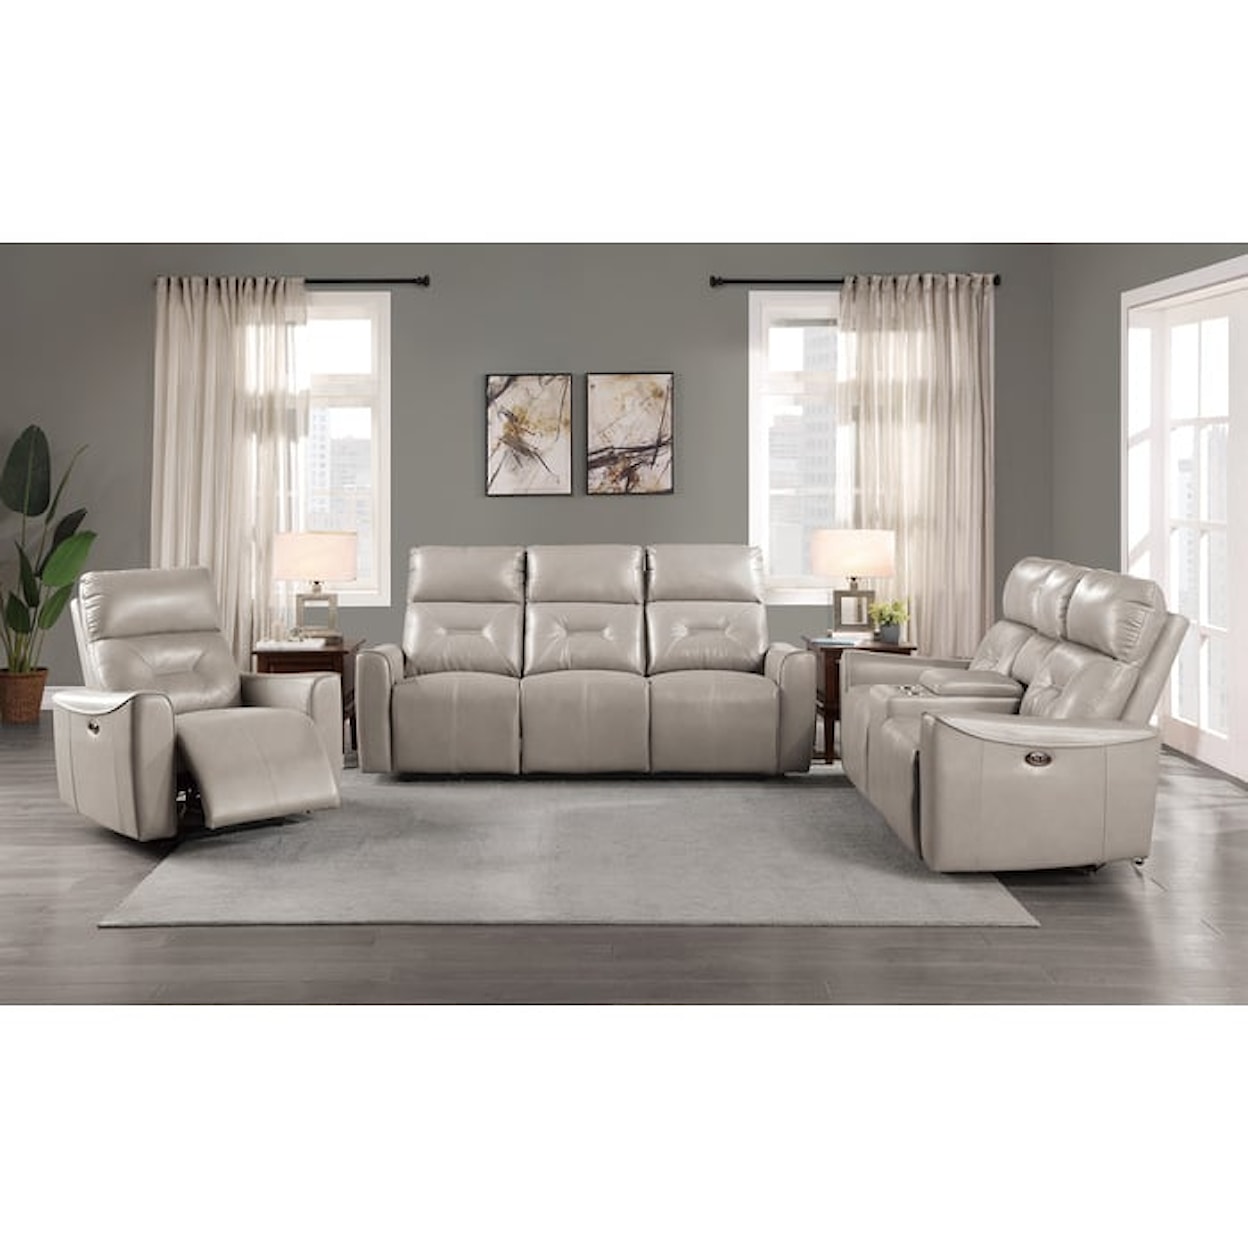 Homelegance Burwell Power Double Reclining Sofa with USB Ports